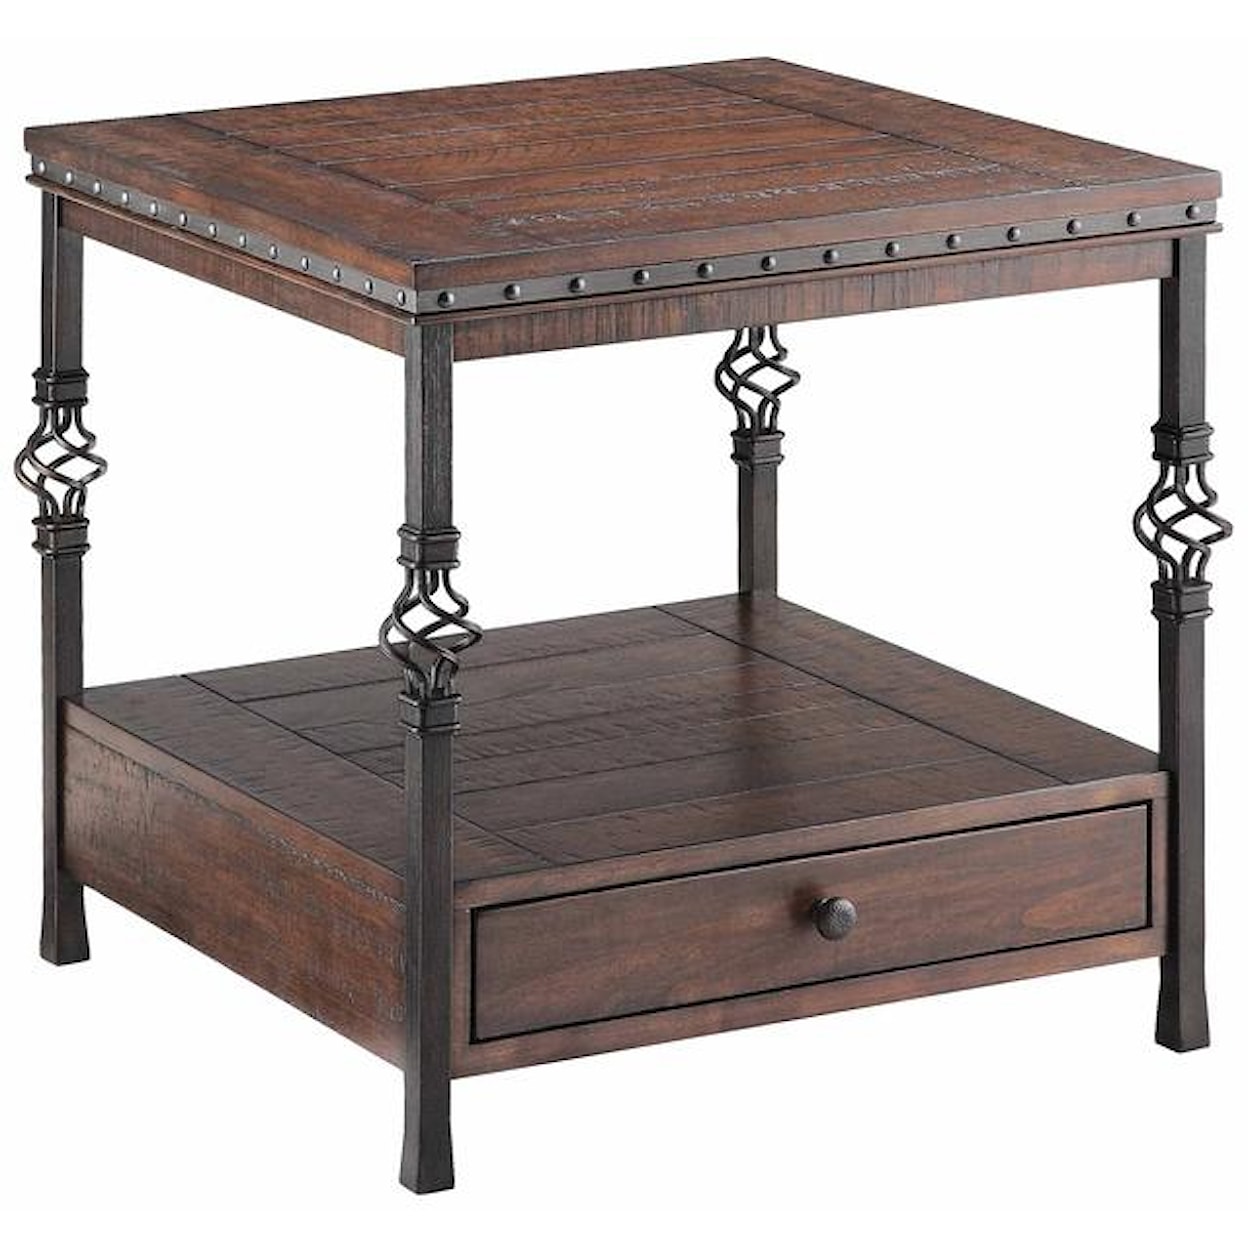 Stein World Accent Tables Sherwood Square End Table